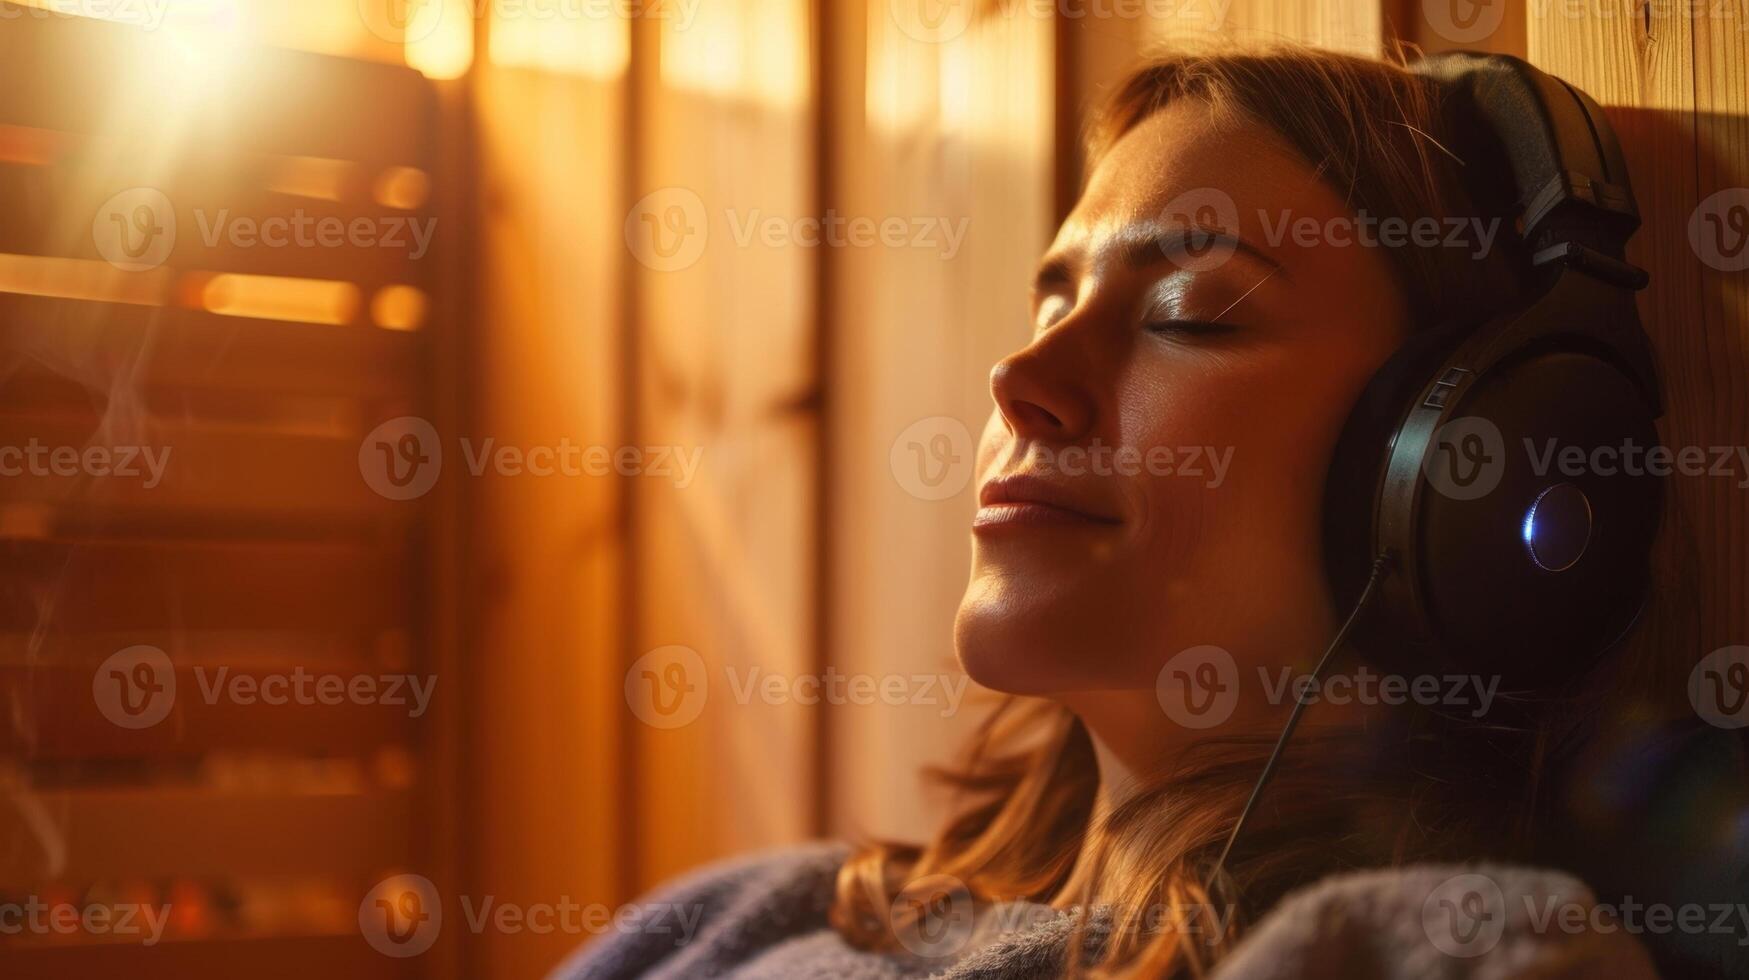 A woman sitting in the sauna listening to a guided visualization exercise through noisecanceling headphones to deepen the relaxation. photo